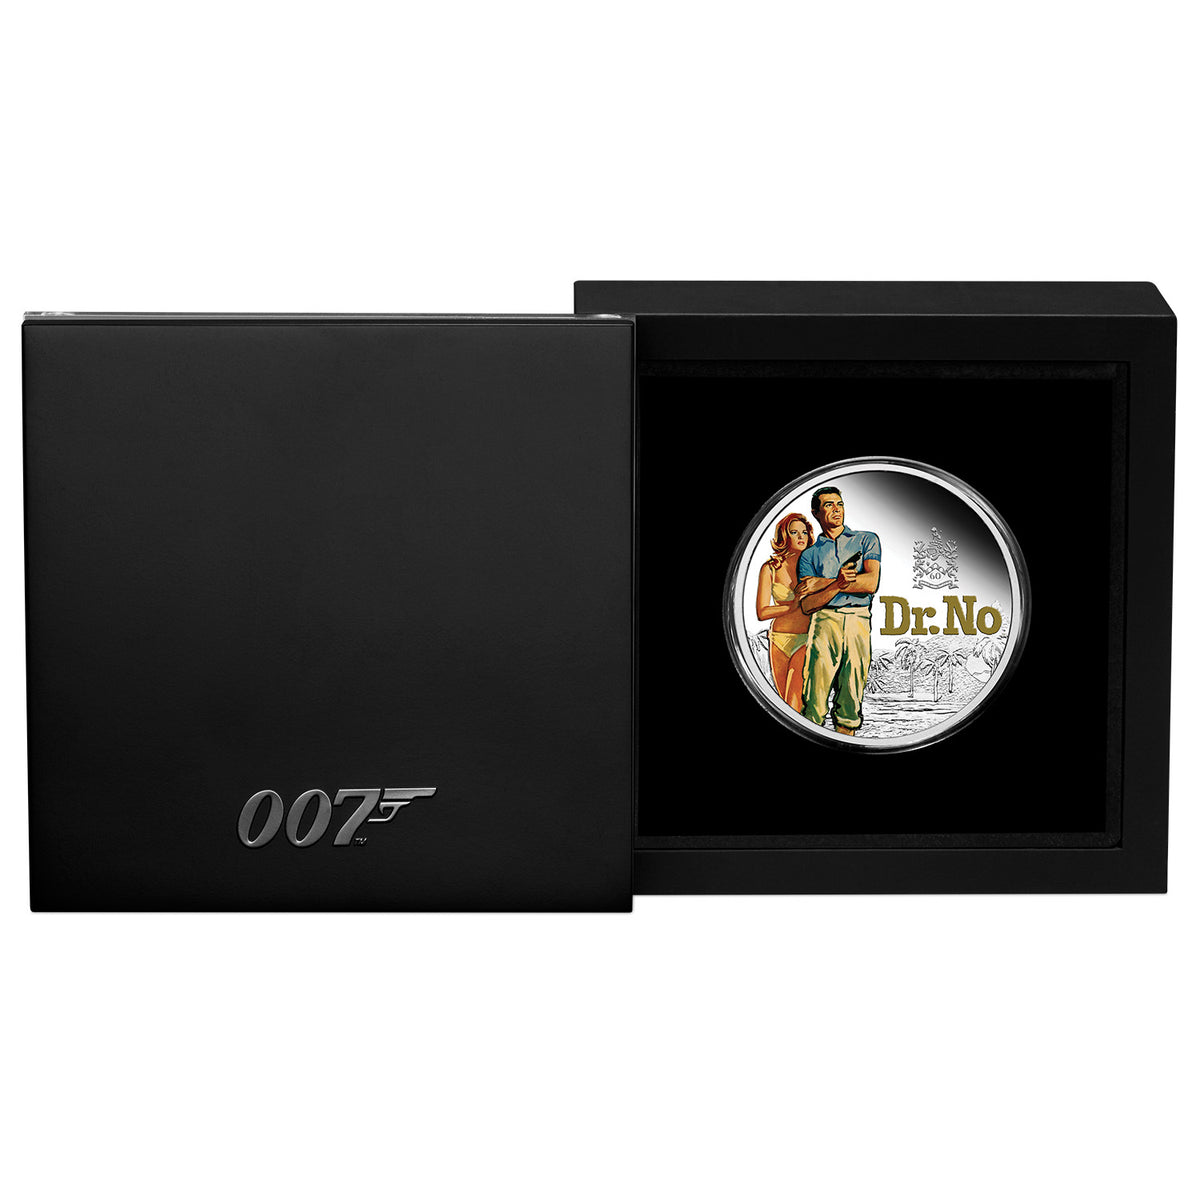 James Bond 1oz Silver Proof Coloured Coin - Dr. No 60th Anniversary Numbered Edition - By The Perth Mint